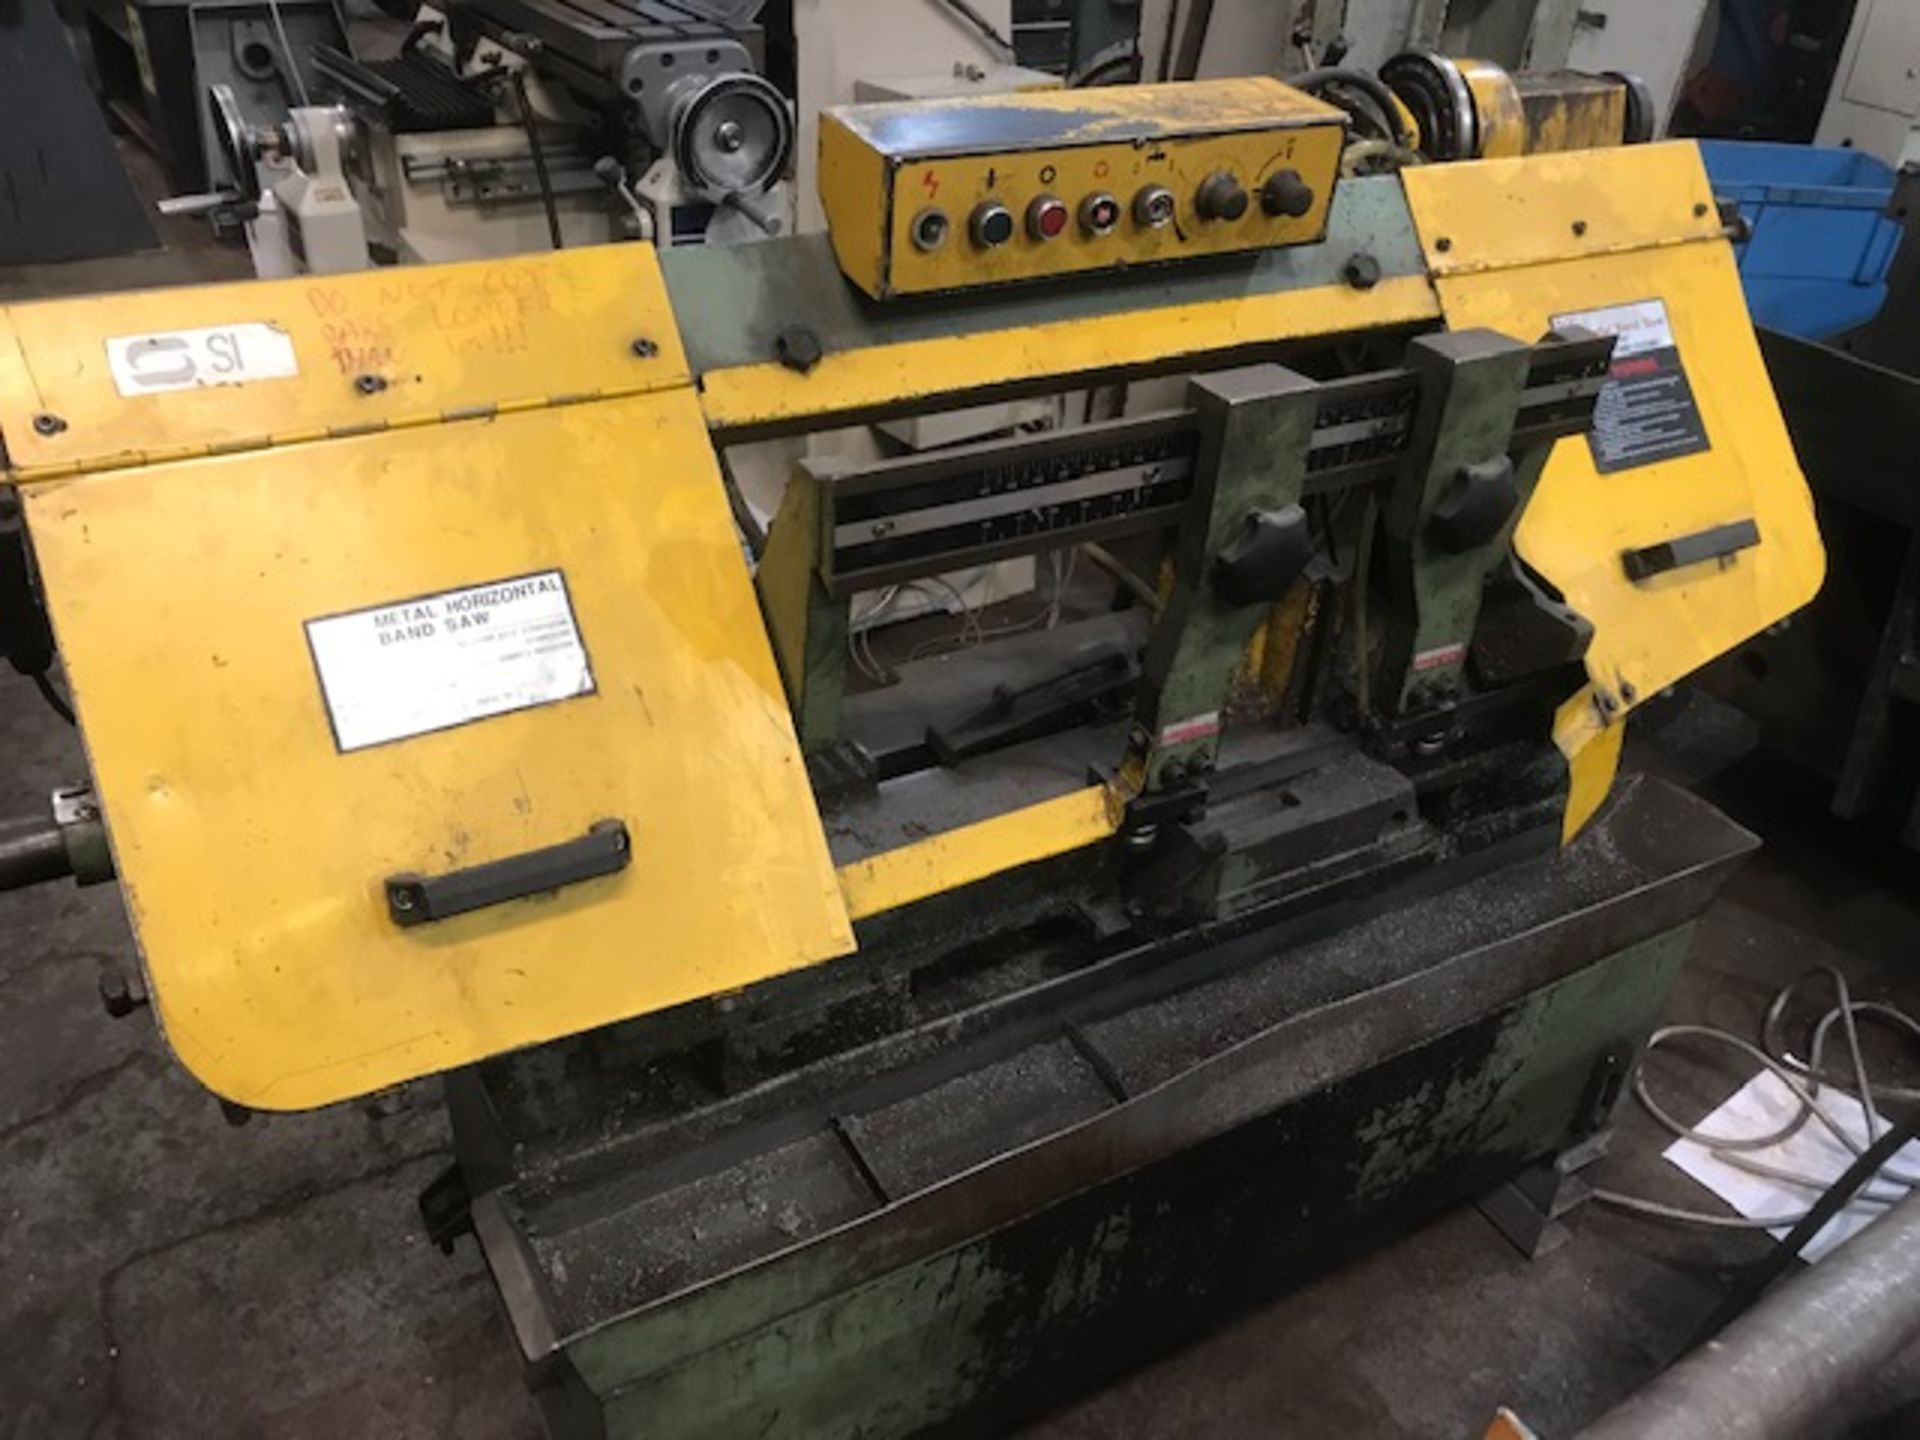 Excel 10" Horizontal Bandsaw - Year 2001